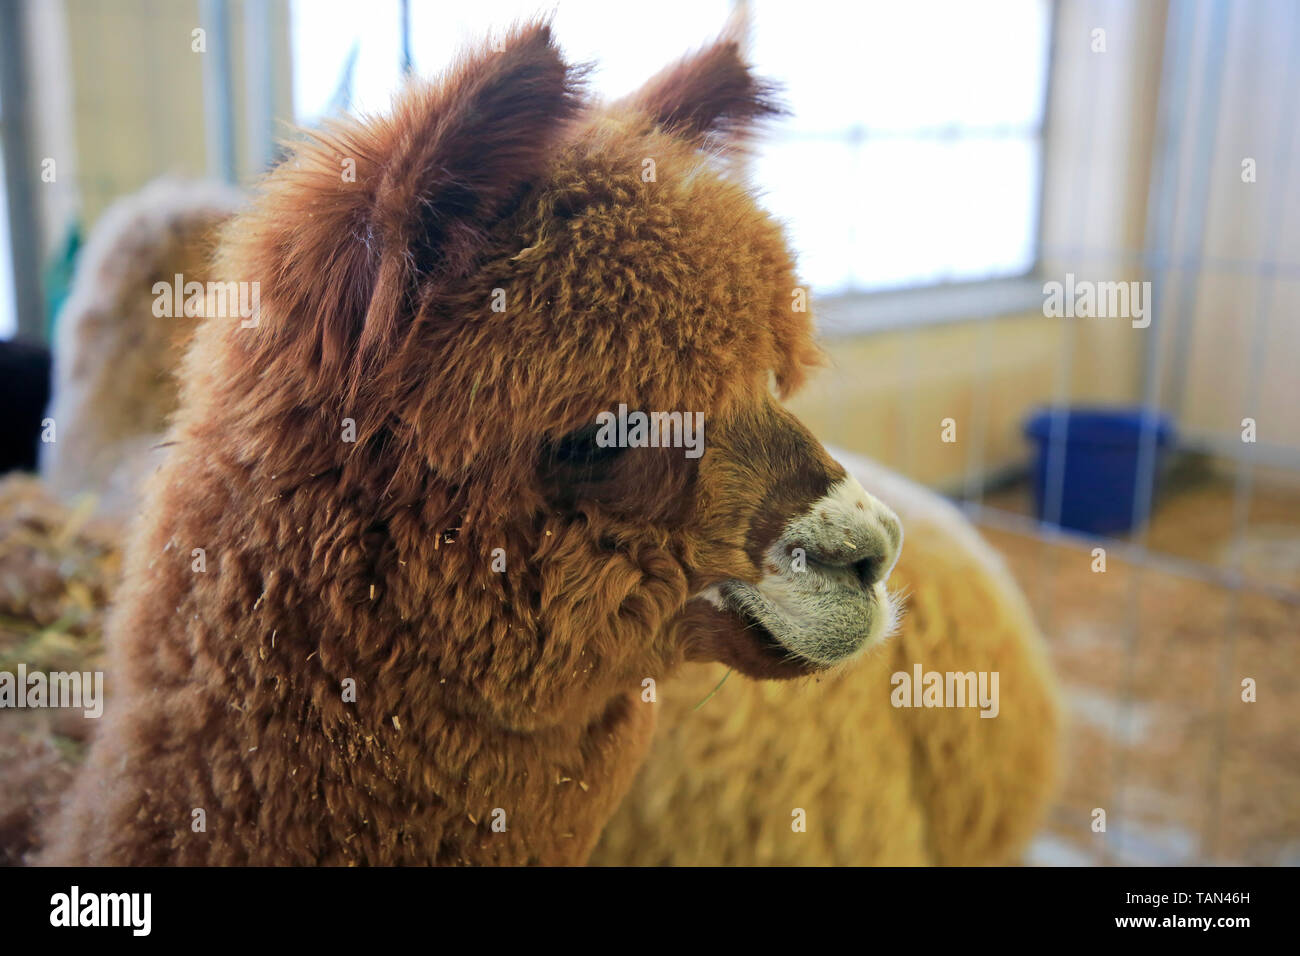 Close up head shot of a brown Alpaca, Vicugna pacos, indoors in a barn. Shallow depth of field. Stock Photo